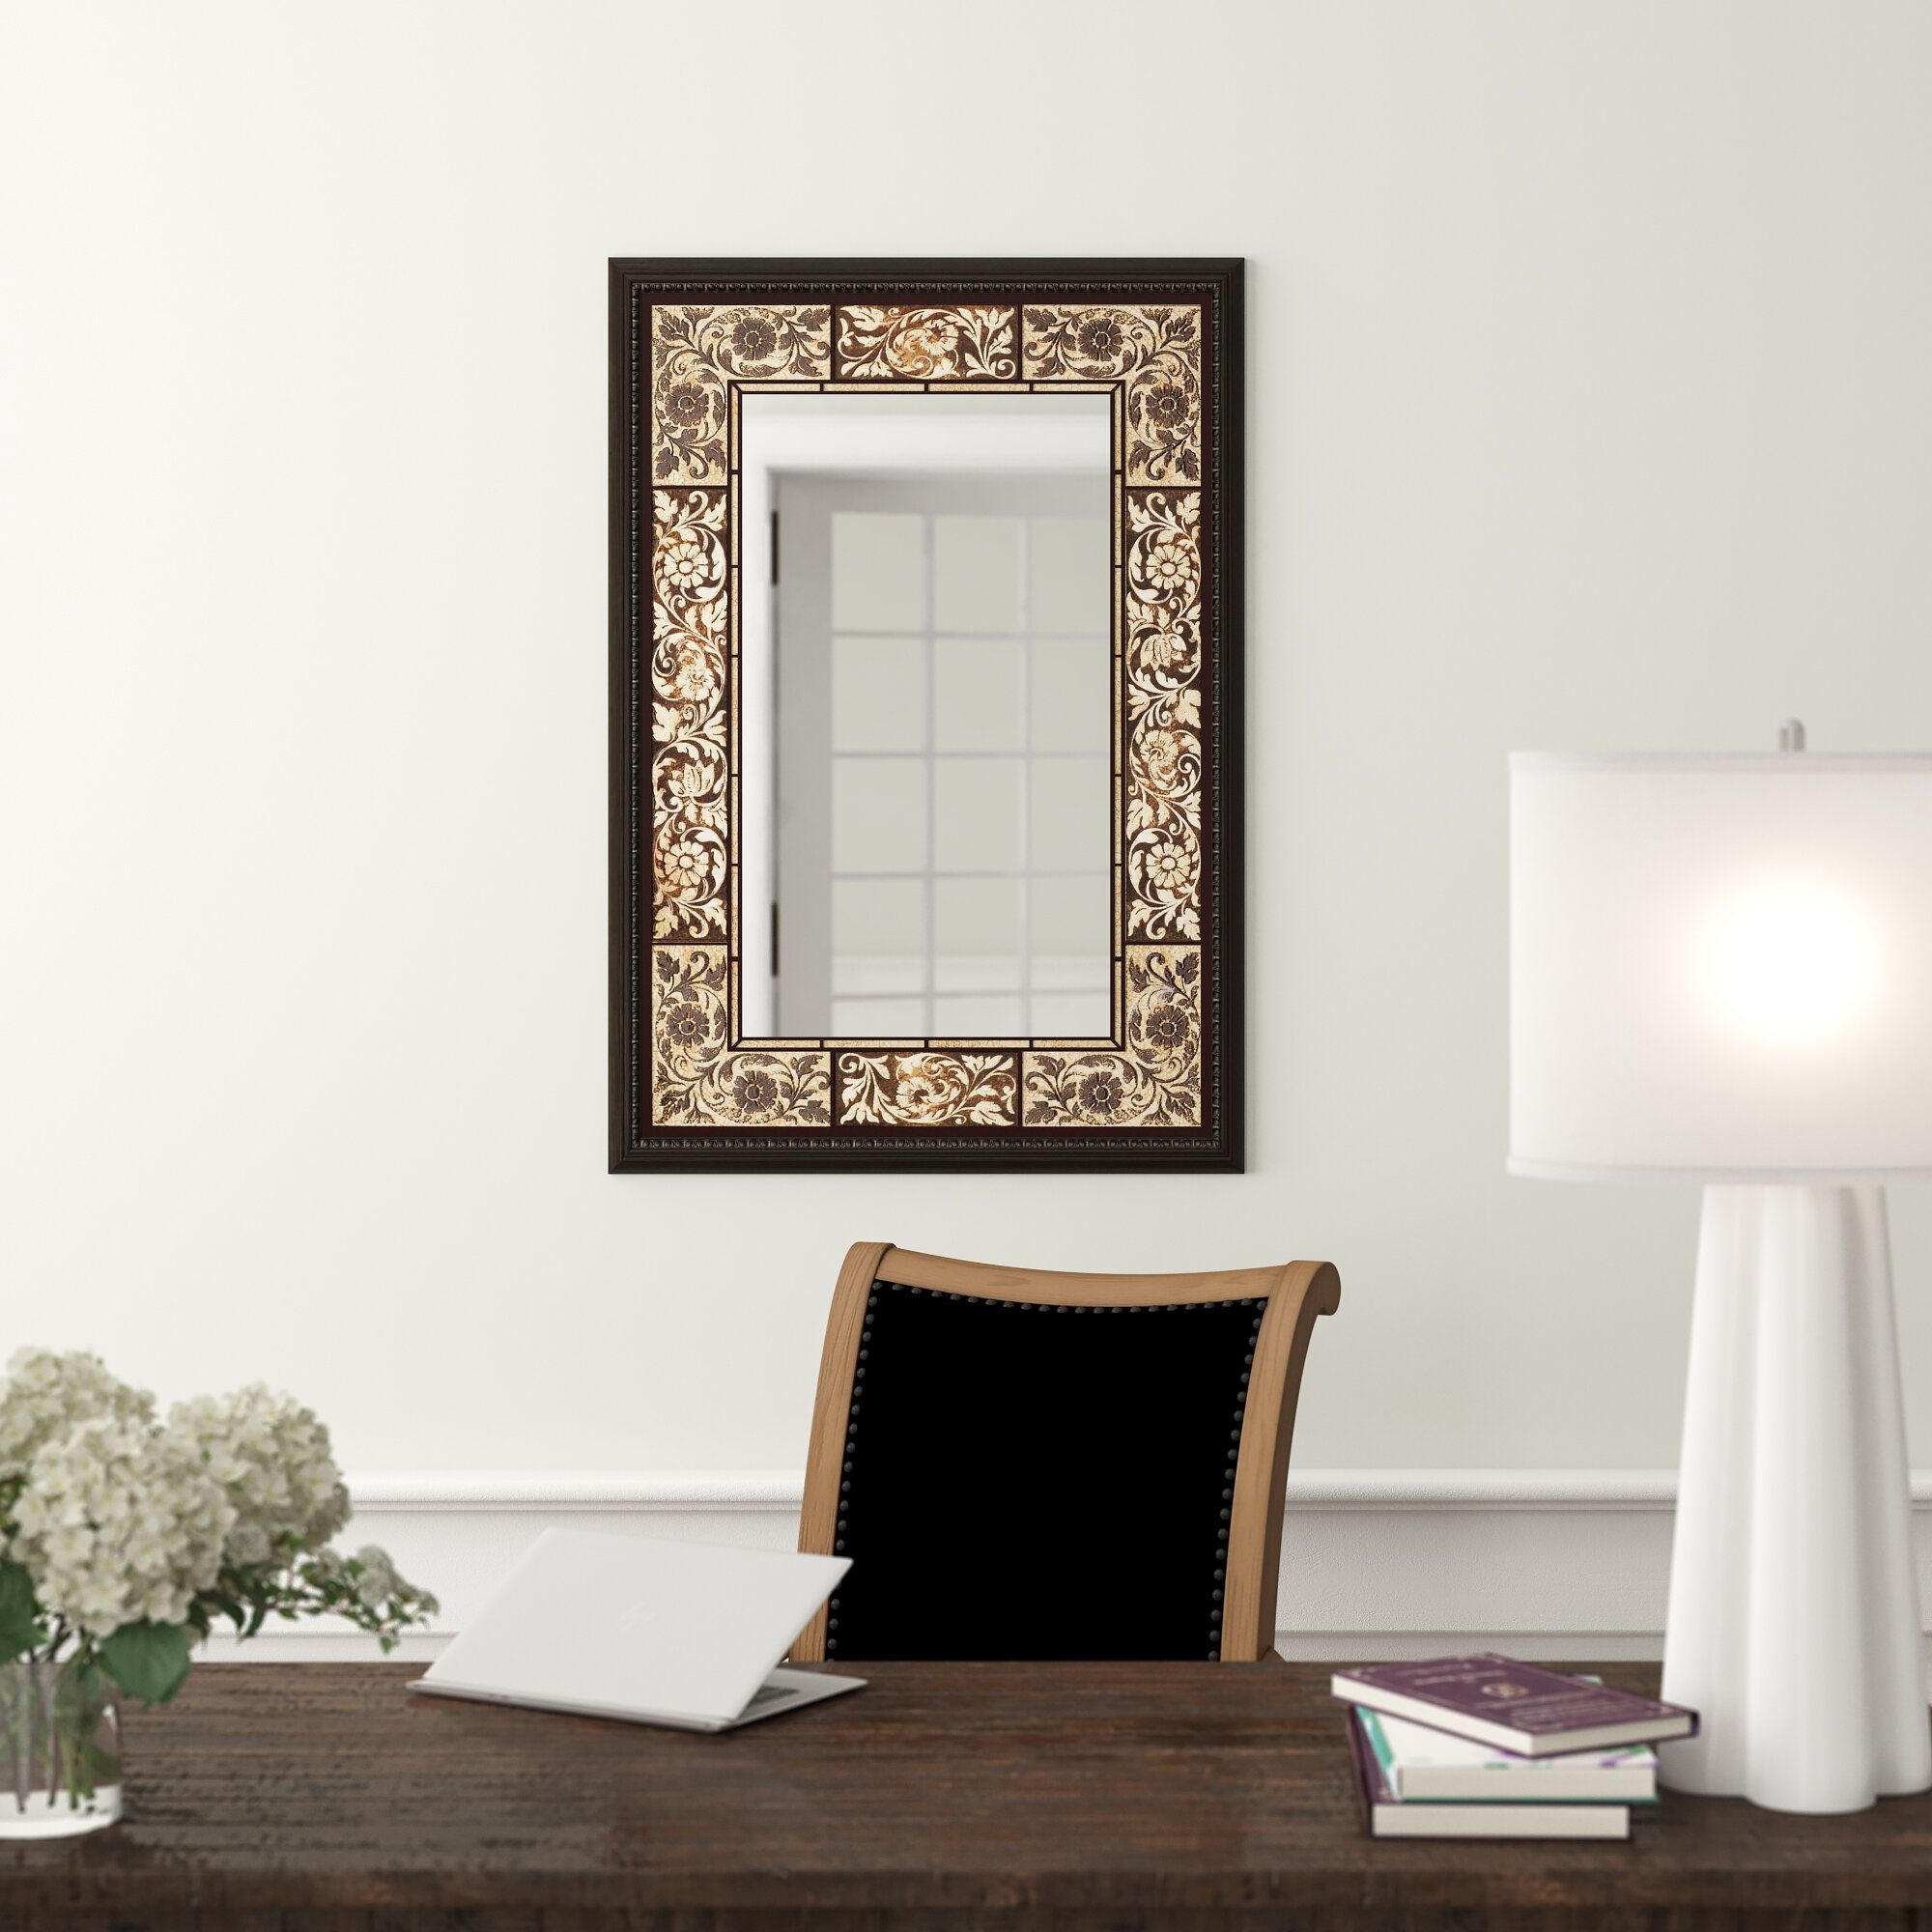 Bronze Rectangle Wall Mirrors You'll Love In 2019 | Wayfair With Regard To Vassallo Beaded Bronze Beveled Wall Mirrors (View 7 of 20)